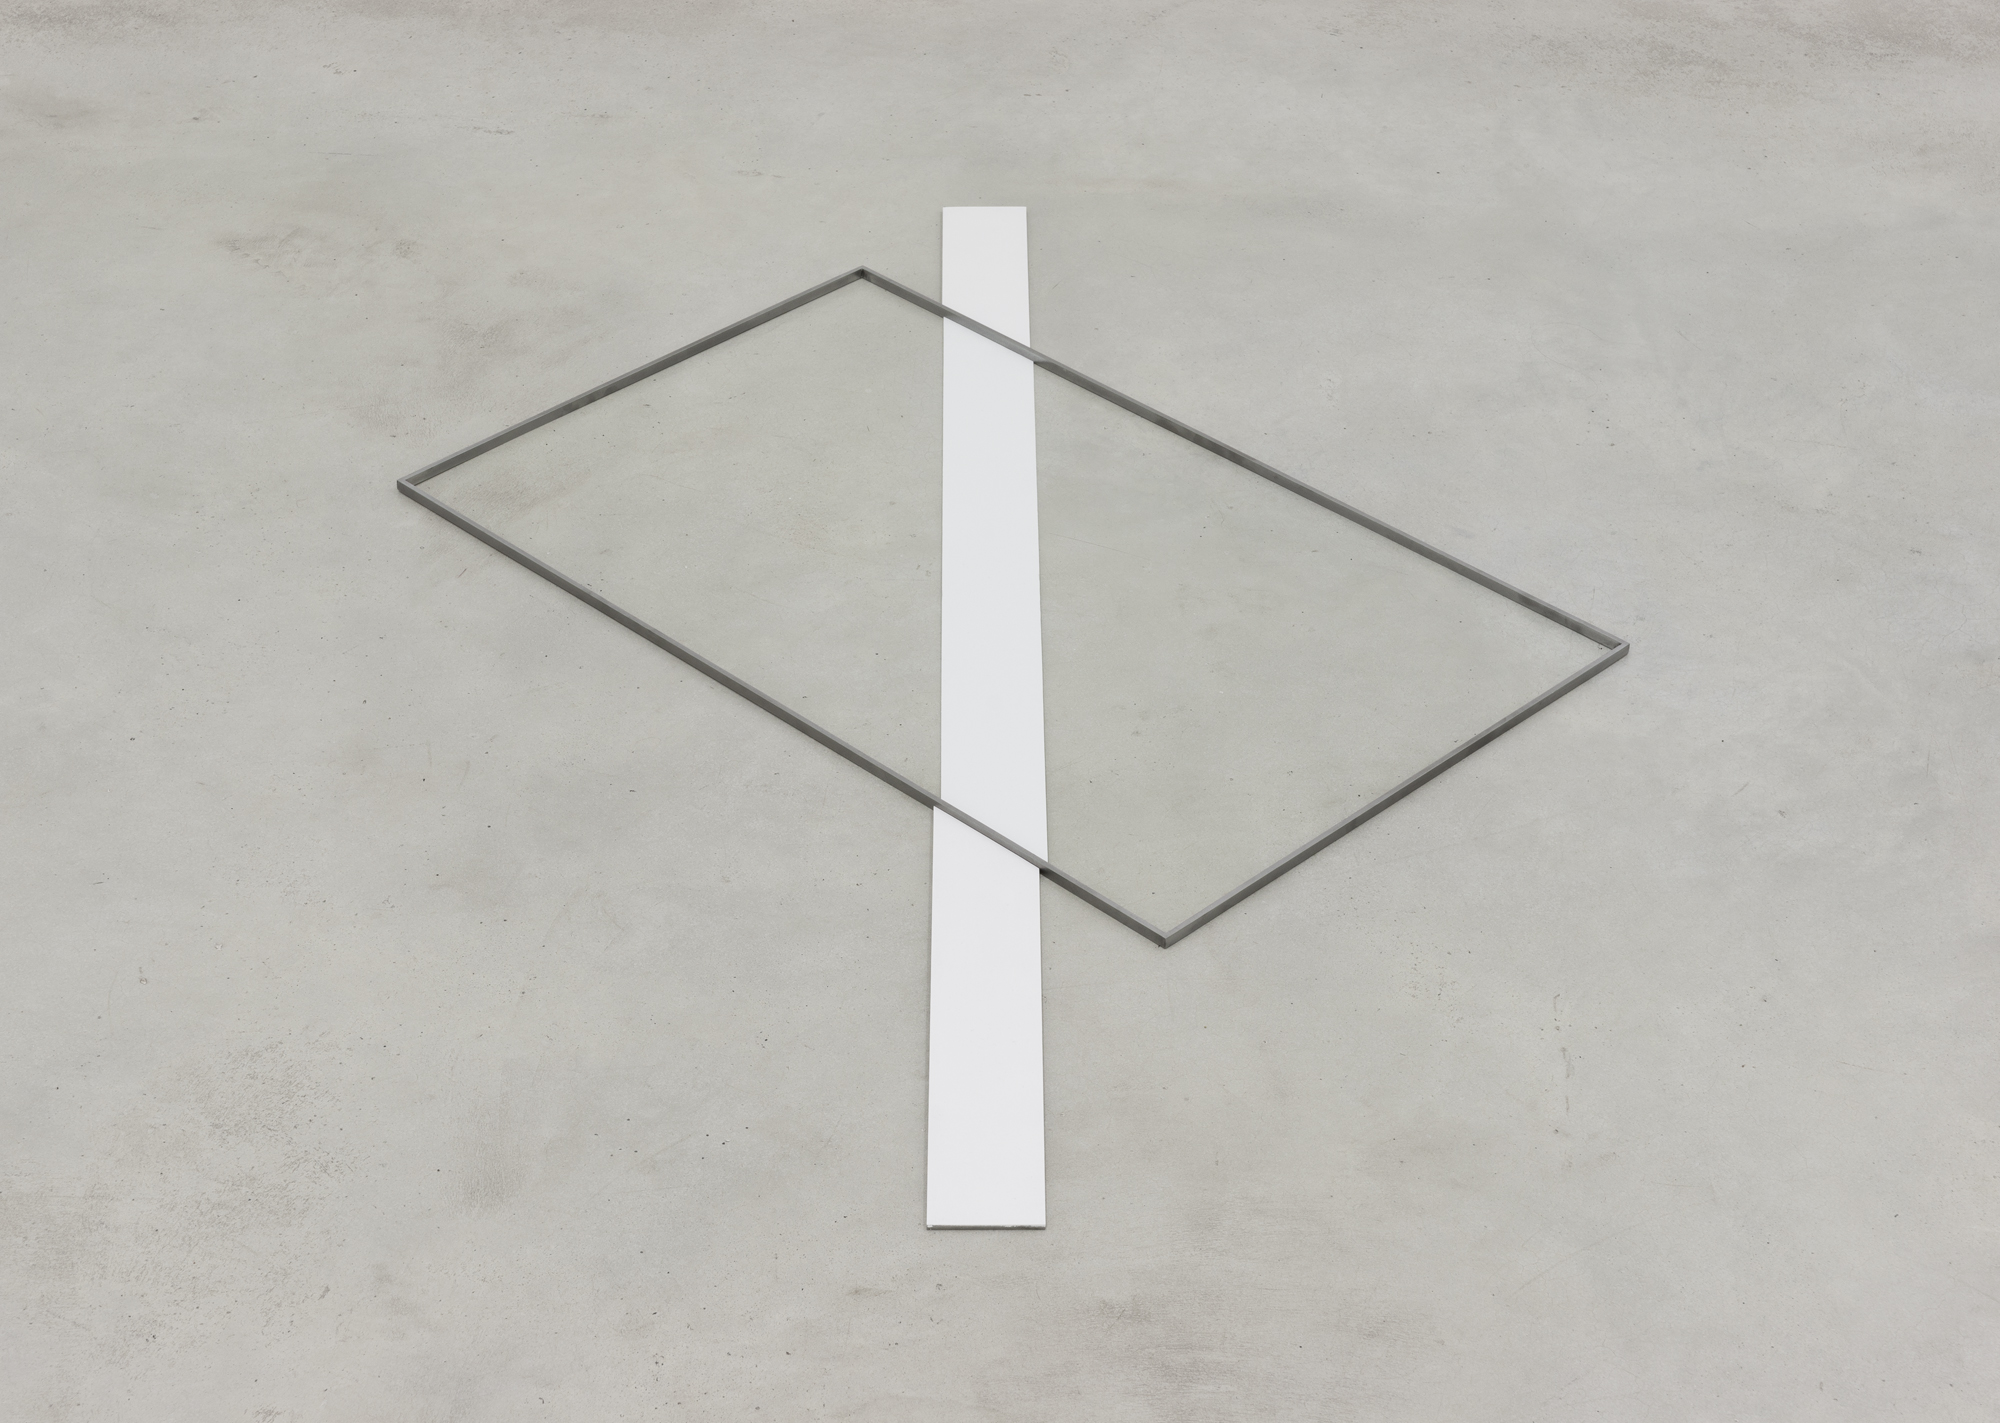 Inaccurate Line, painted iron, wax on the floor, 1 x 146 x 105 cm, 2015